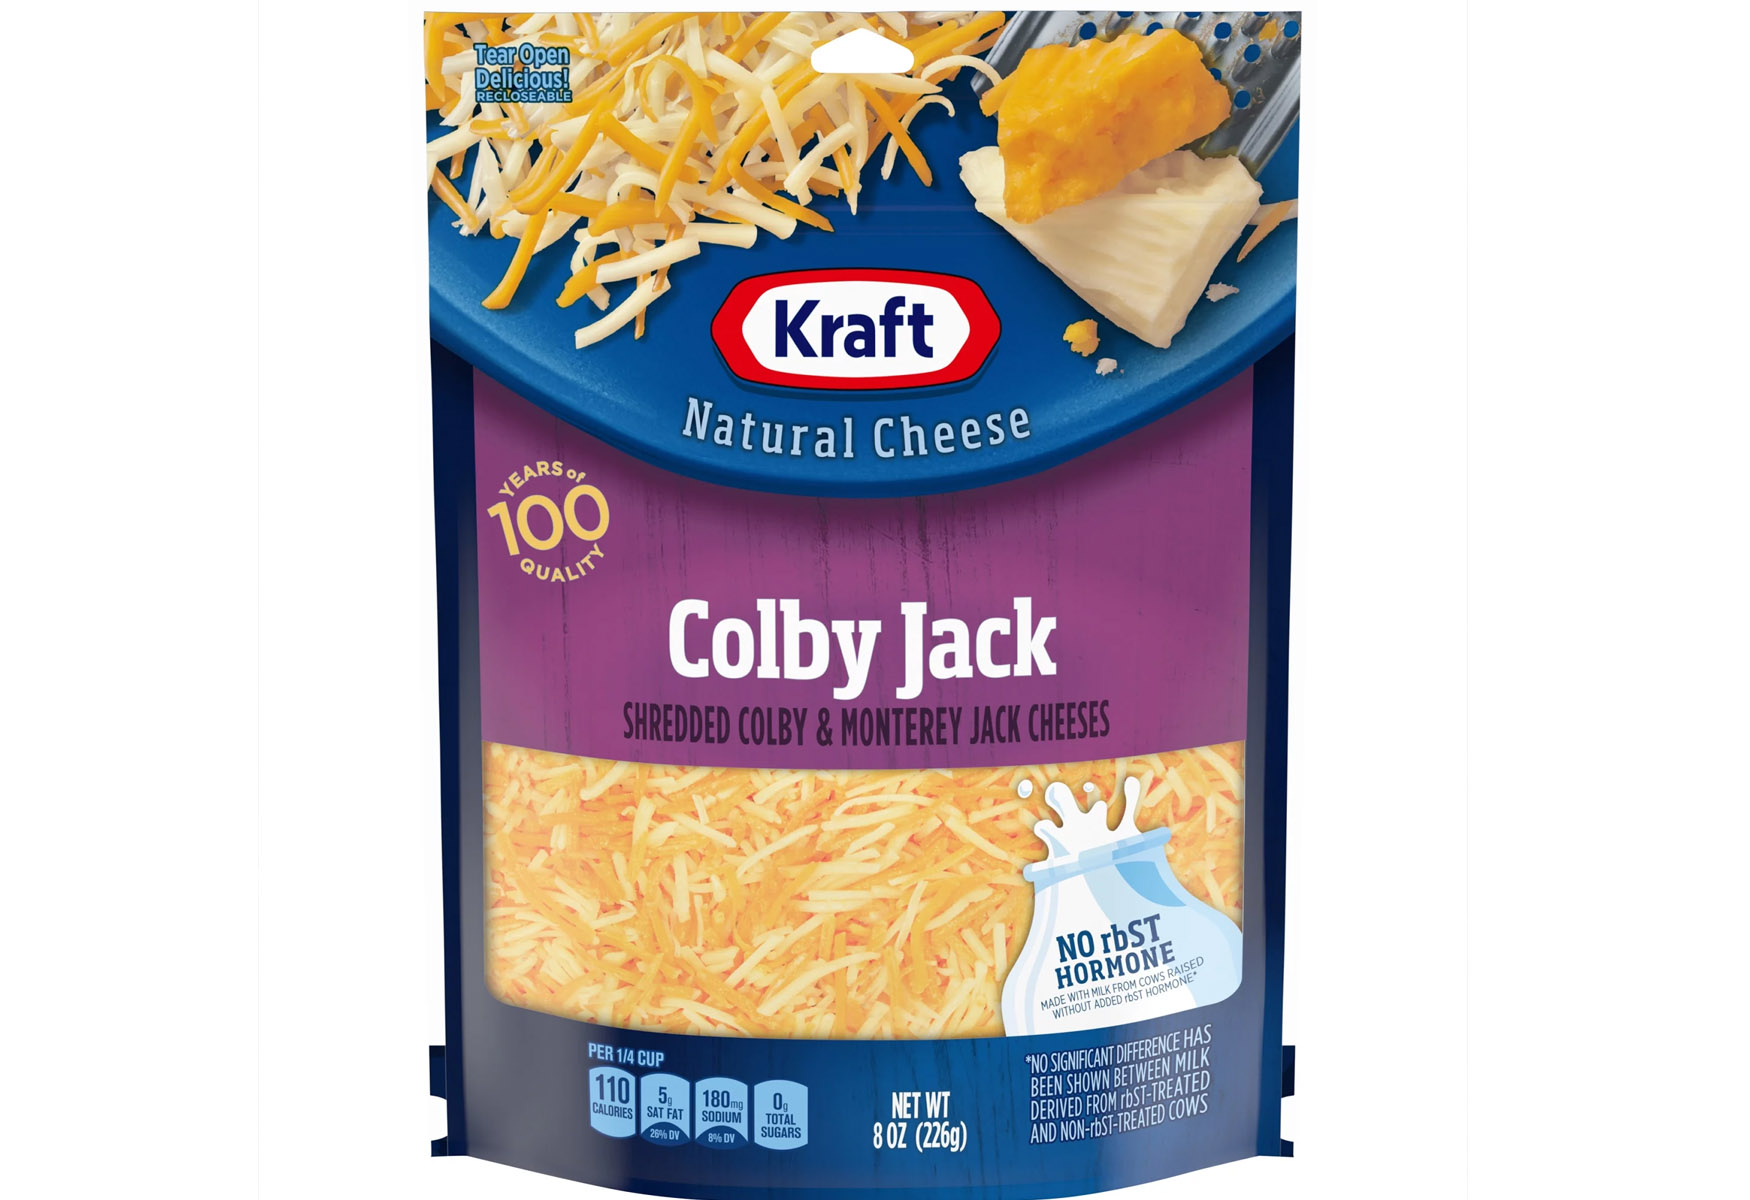 19-kraft-colby-jack-cheese-nutrition-facts